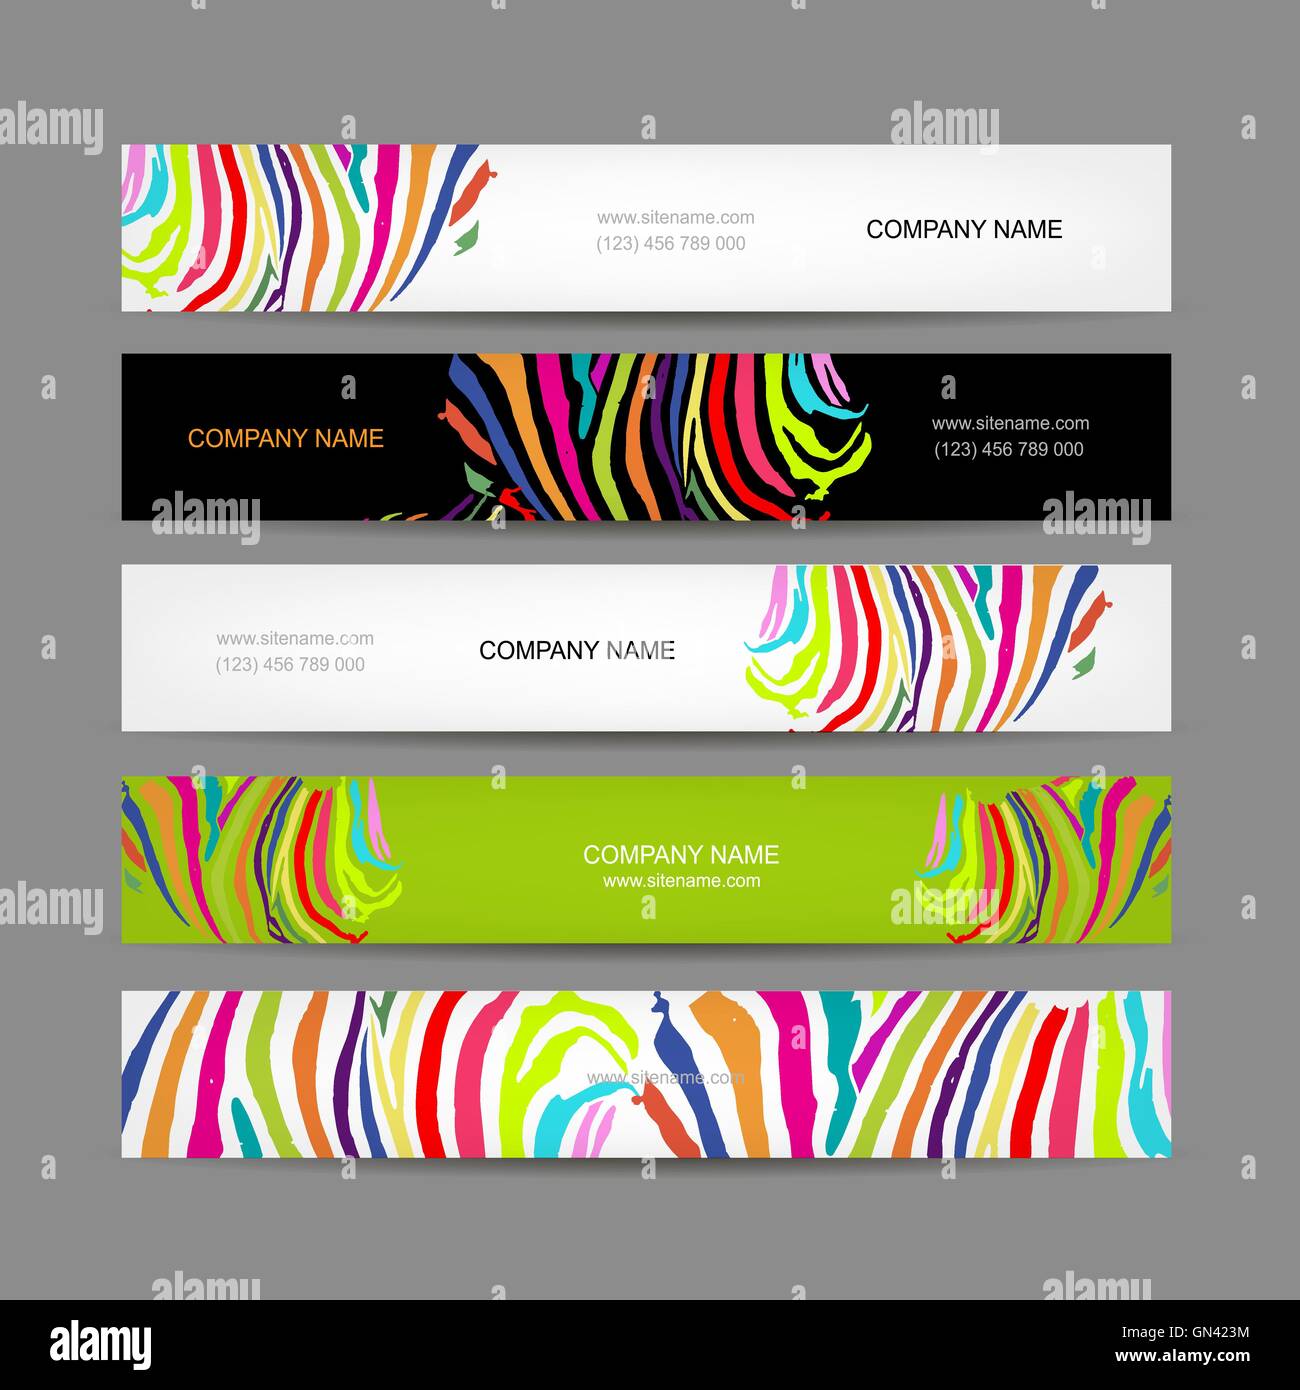 Set of banners, colorful zebra print design Stock Vector